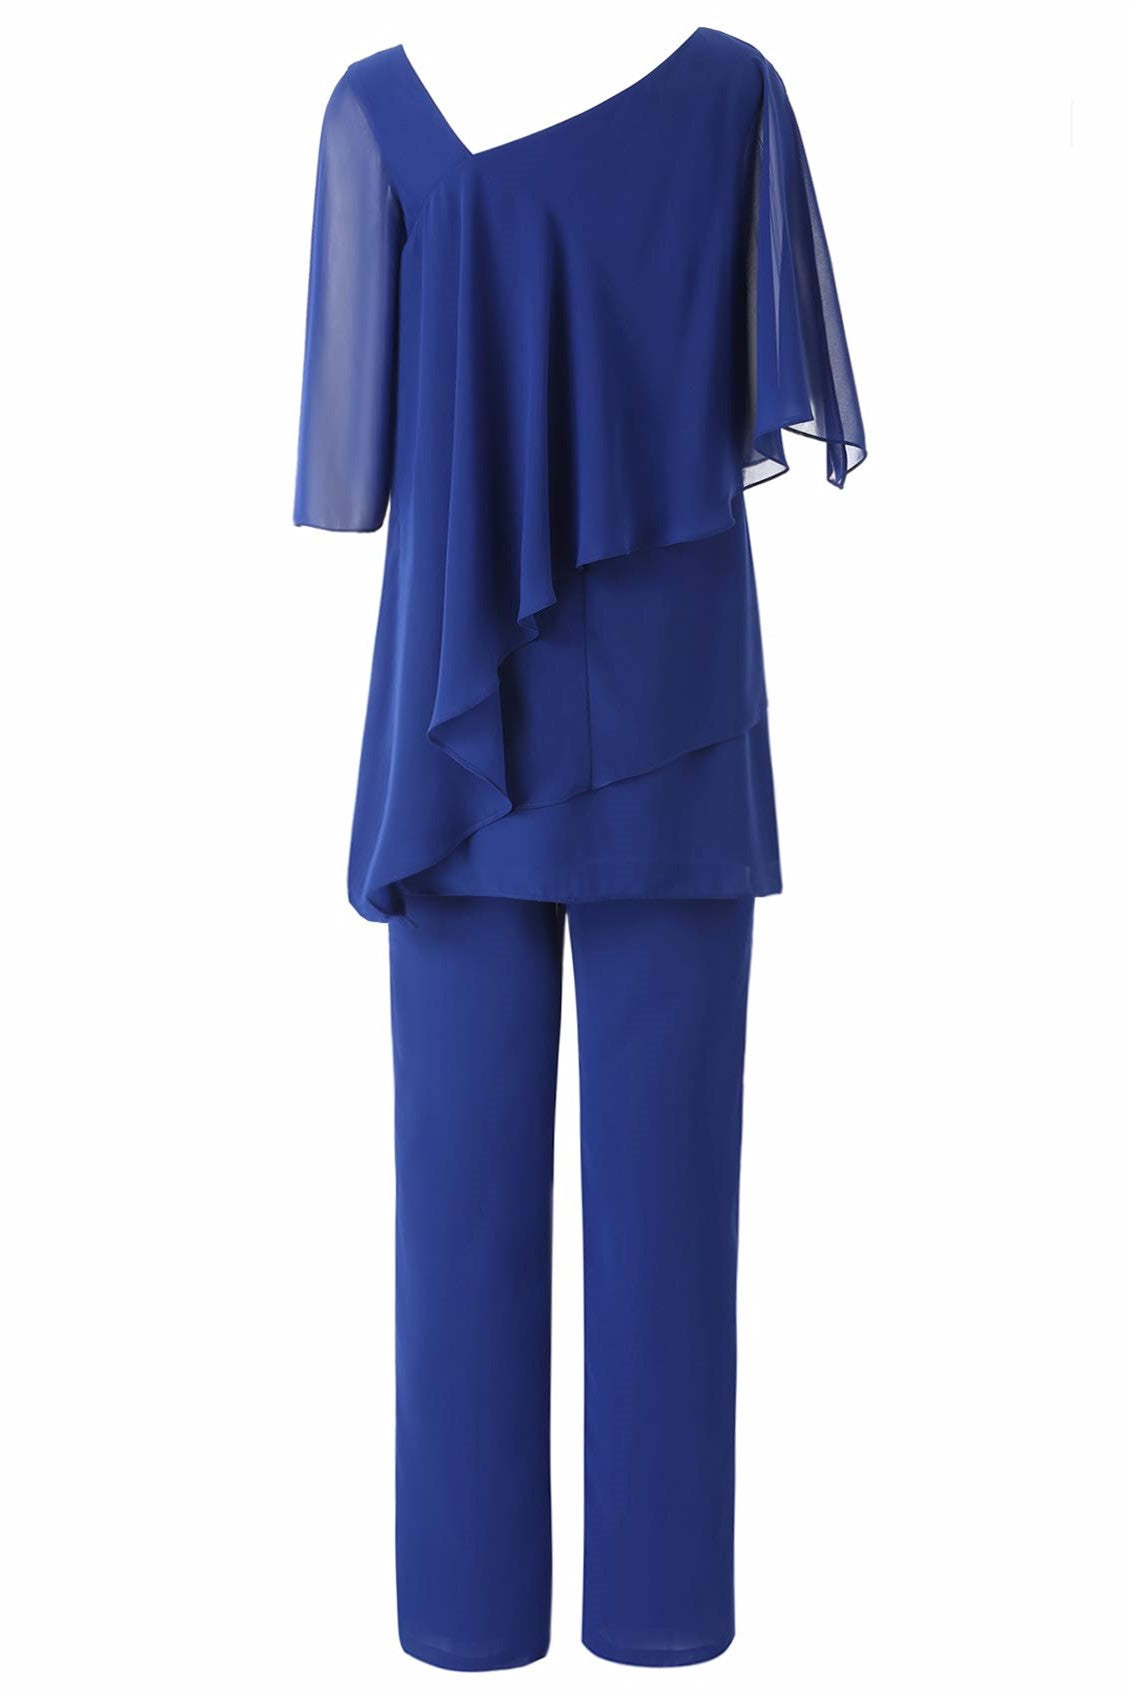 Two Piece Ruffle Royal Blue Mother of Bride Suit